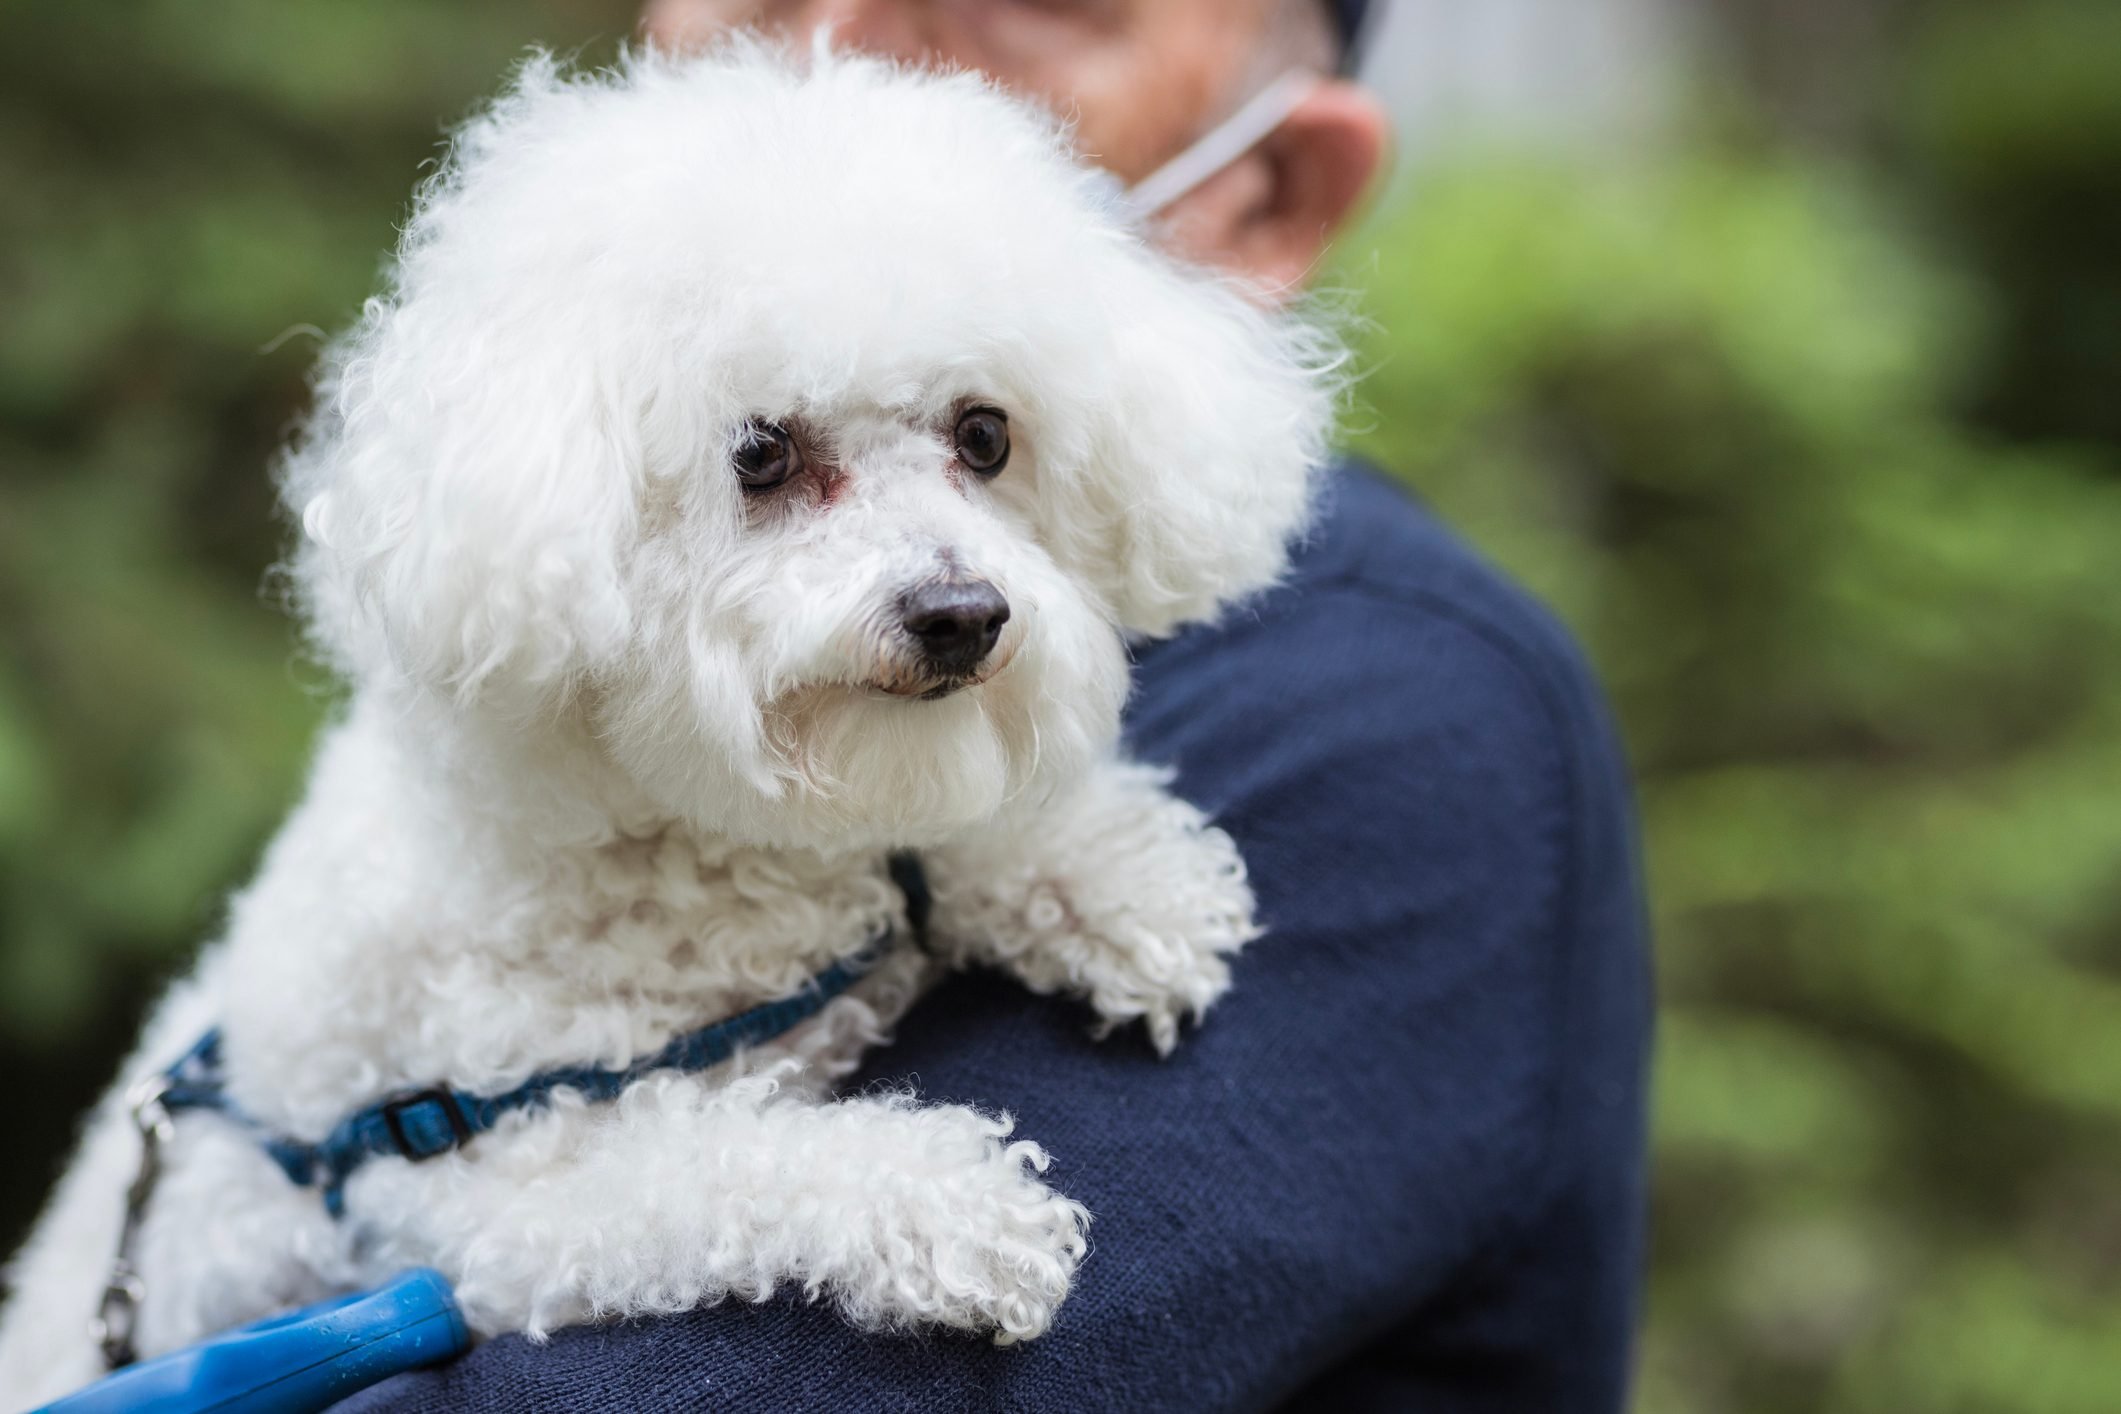 The Perfect Companion Dog For Elderly Individuals With Mobility Issues: Poodle/Bichon Mix Pros And Cons Revealed!